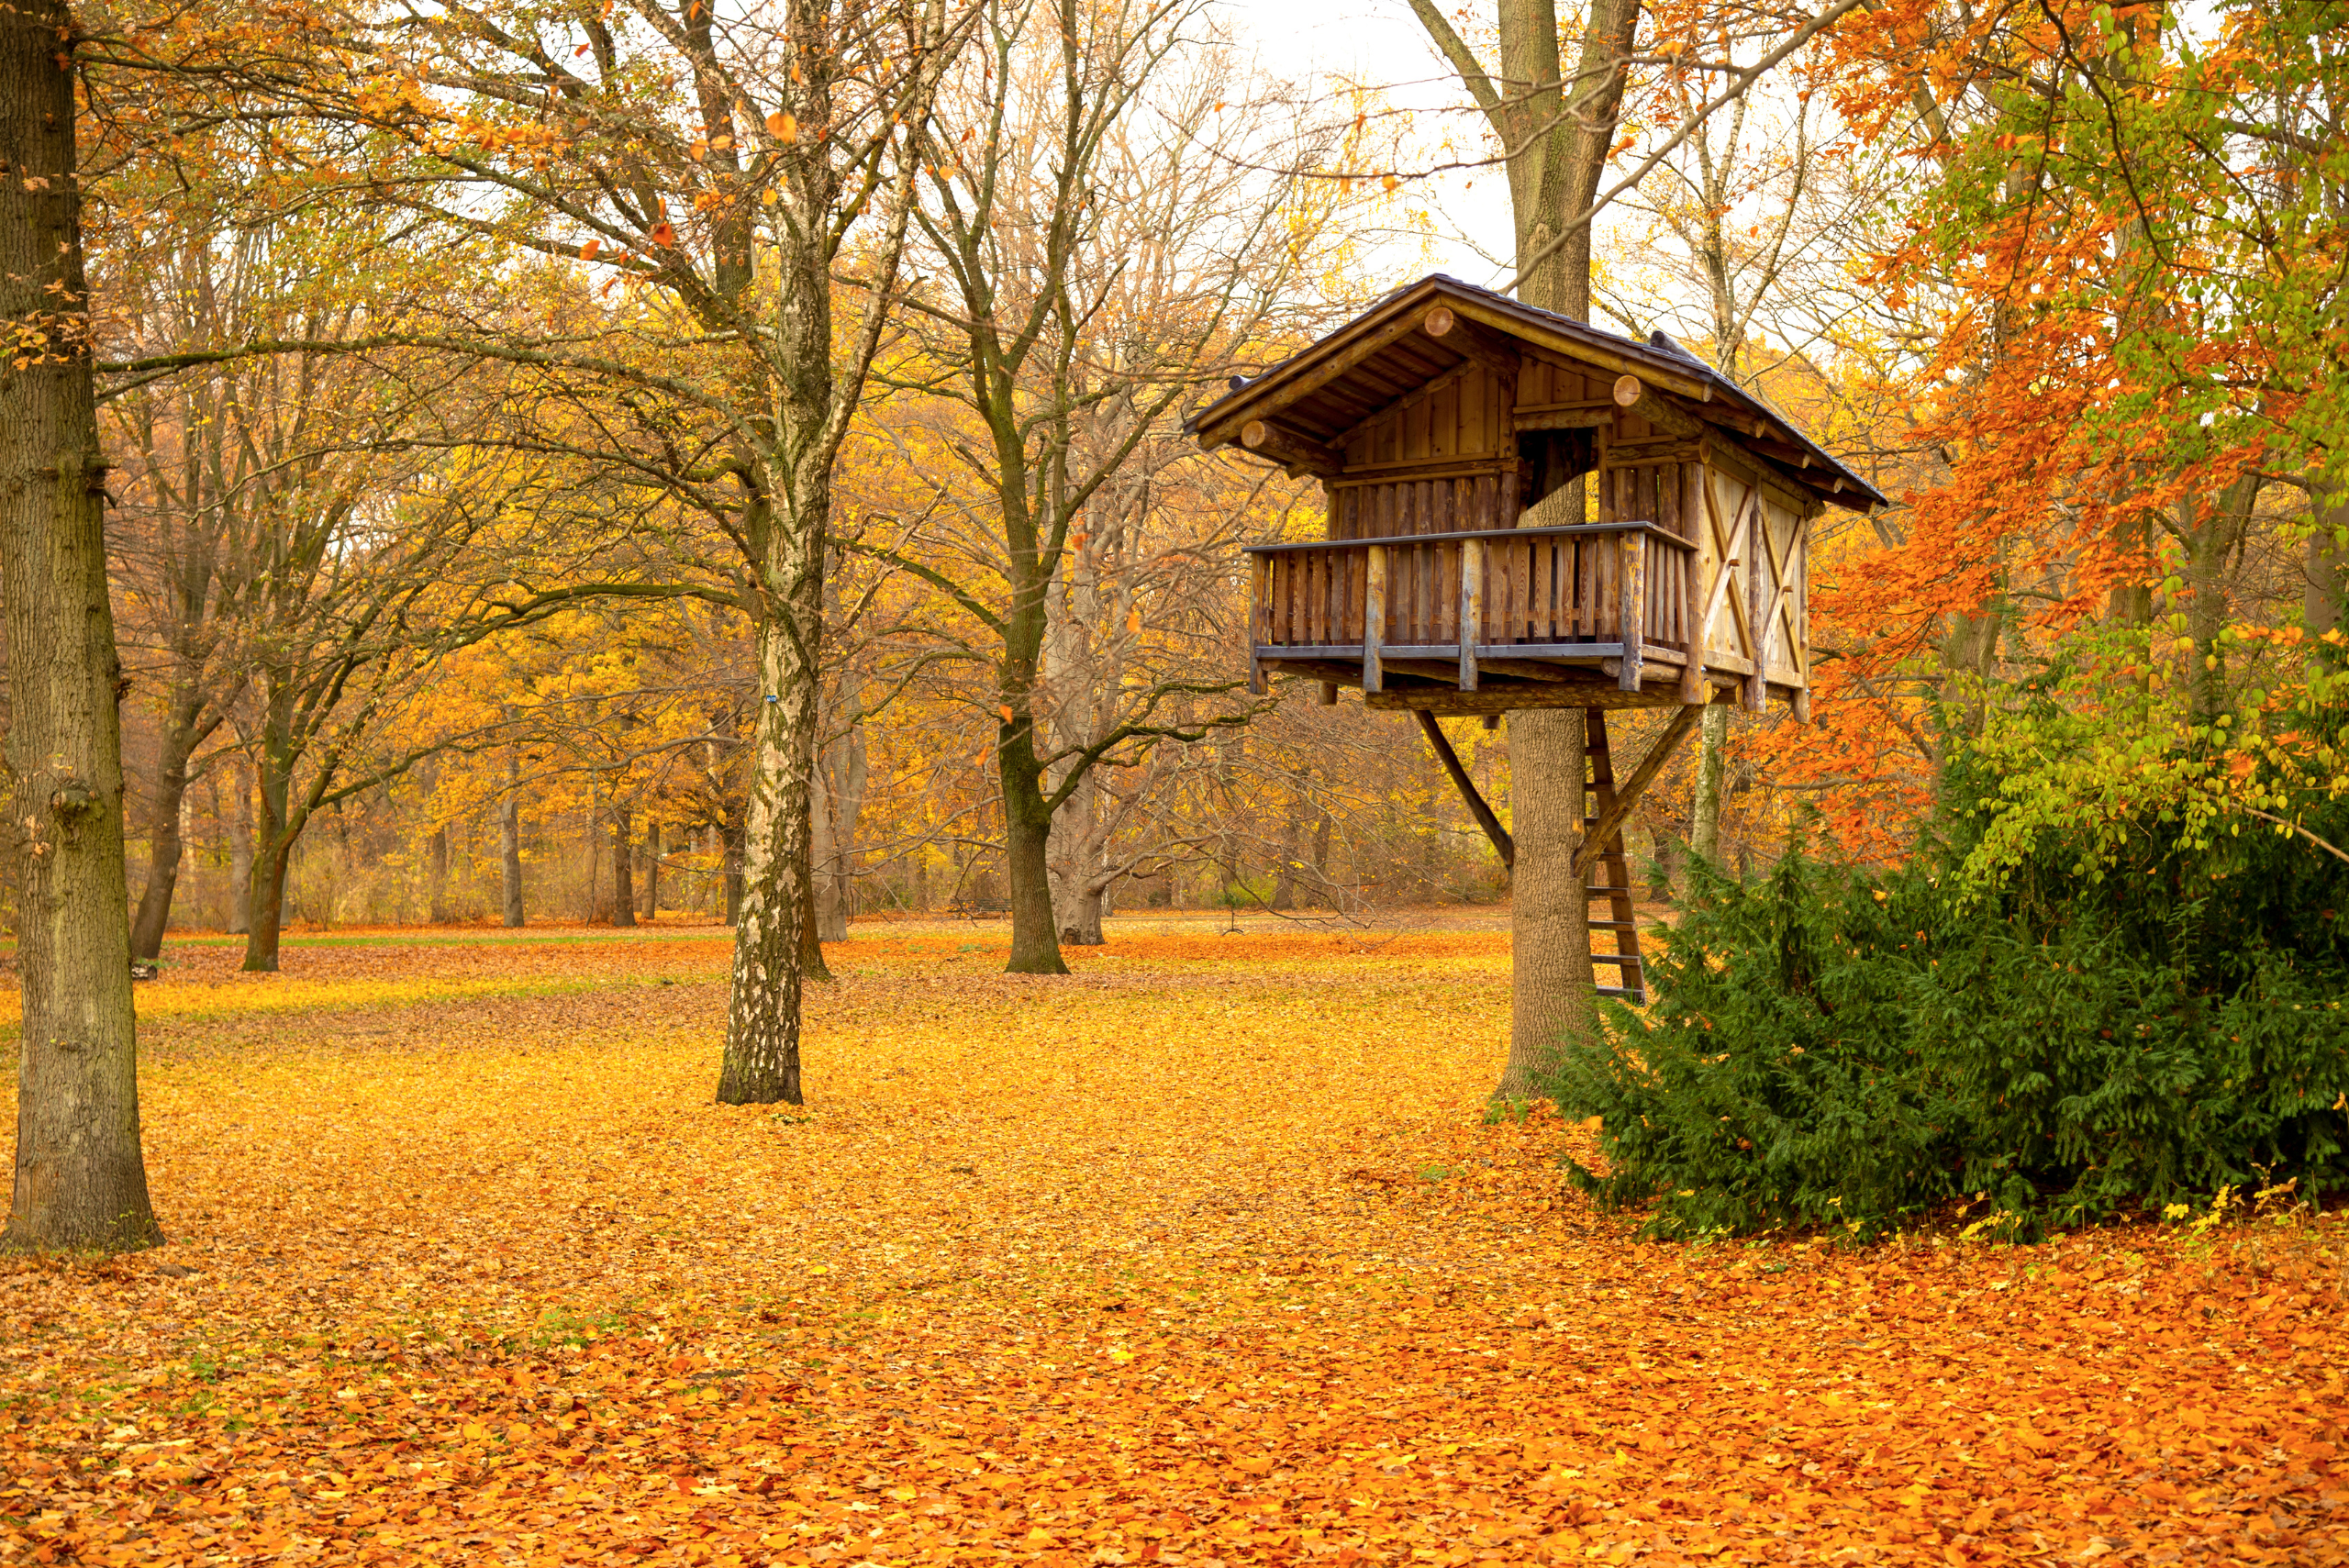 Treehouse in the fall, tree leaves fallen off the trees.